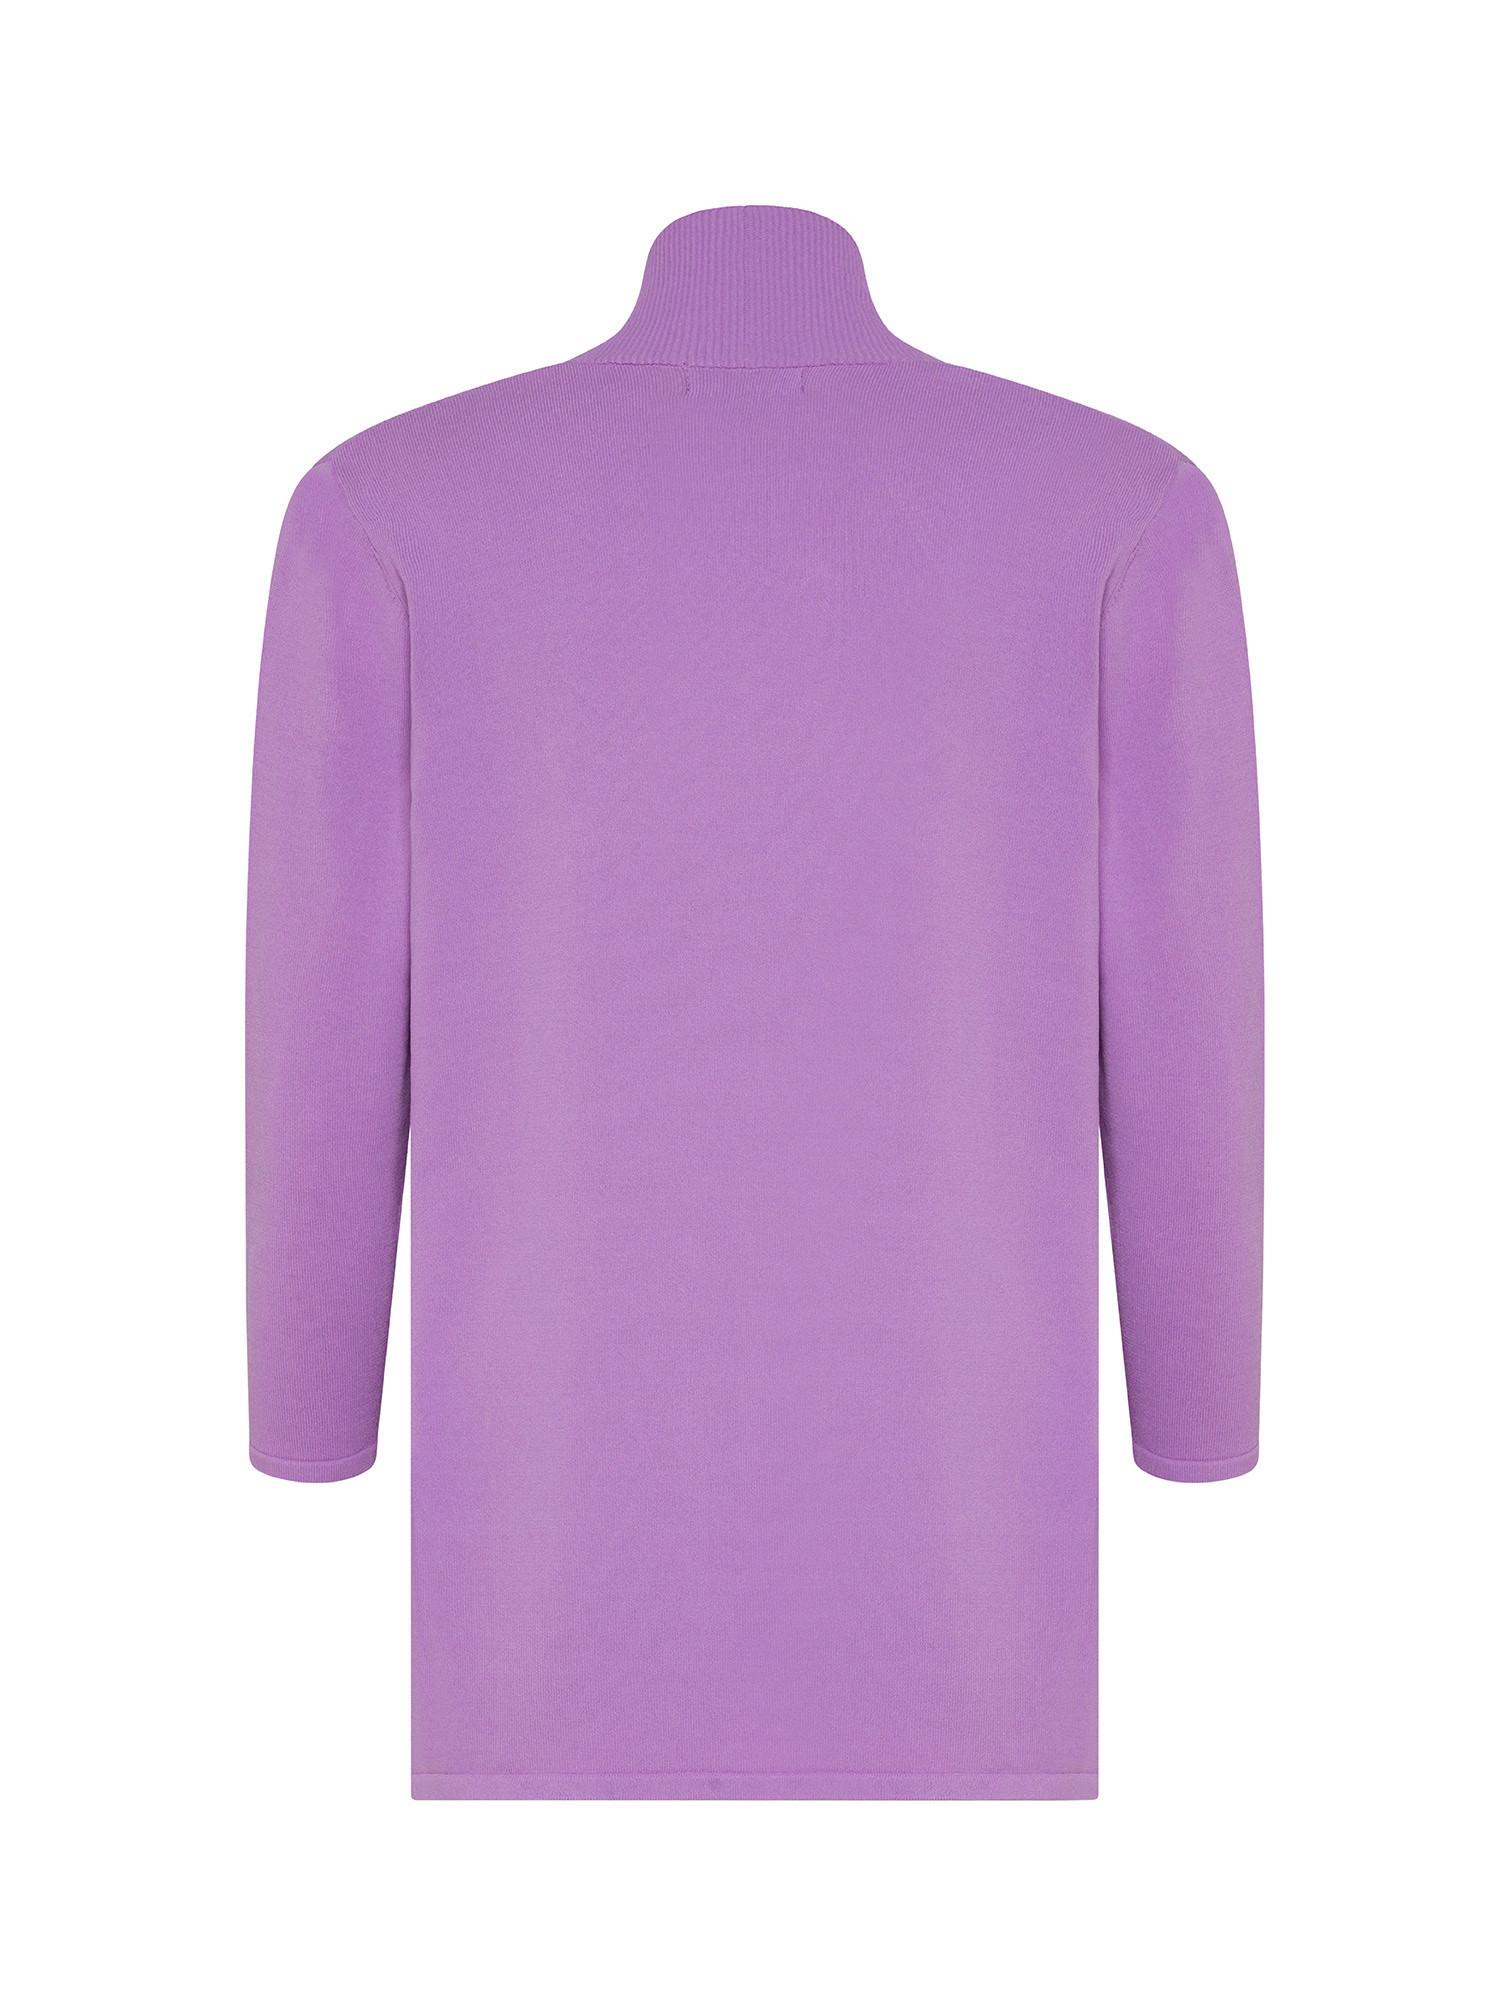 Koan - Cardigan with 3/4 sleeves, Purple Lilac, large image number 1